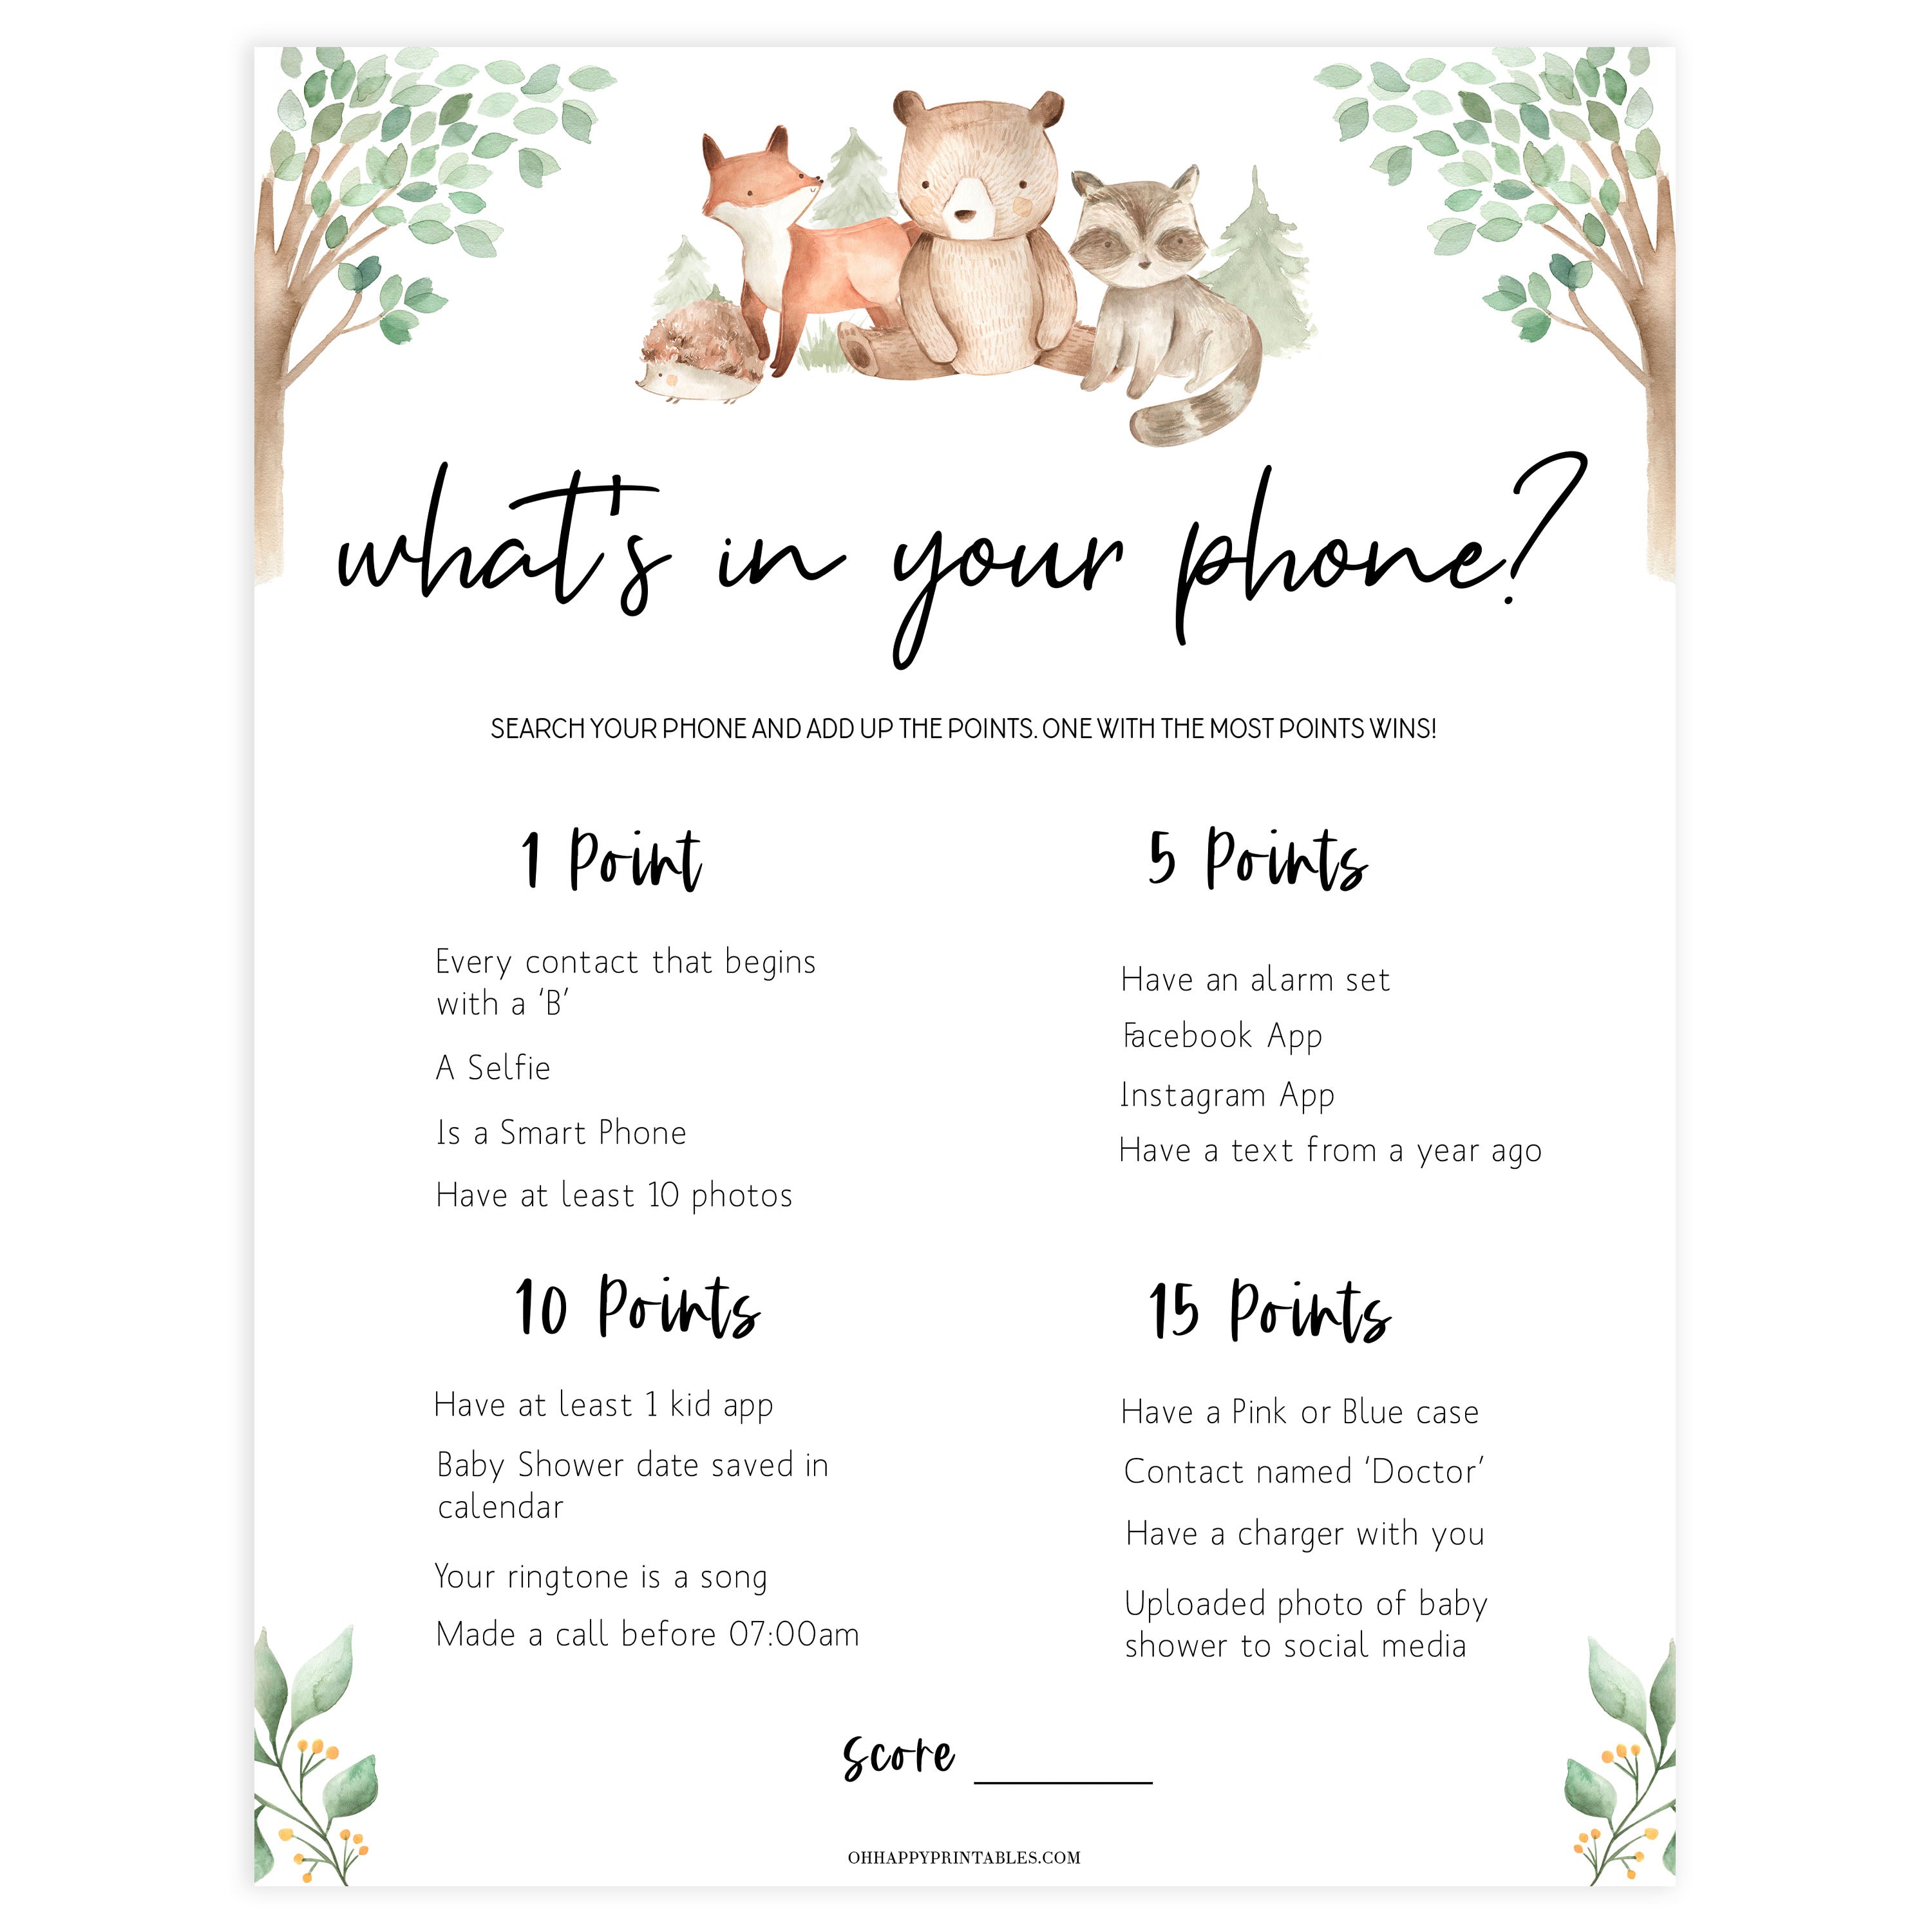 whats in your phone baby game, Printable baby shower games, woodland animals baby games, baby shower games, fun baby shower ideas, top baby shower ideas, woodland baby shower, baby shower games, fun woodland animals baby shower ideas